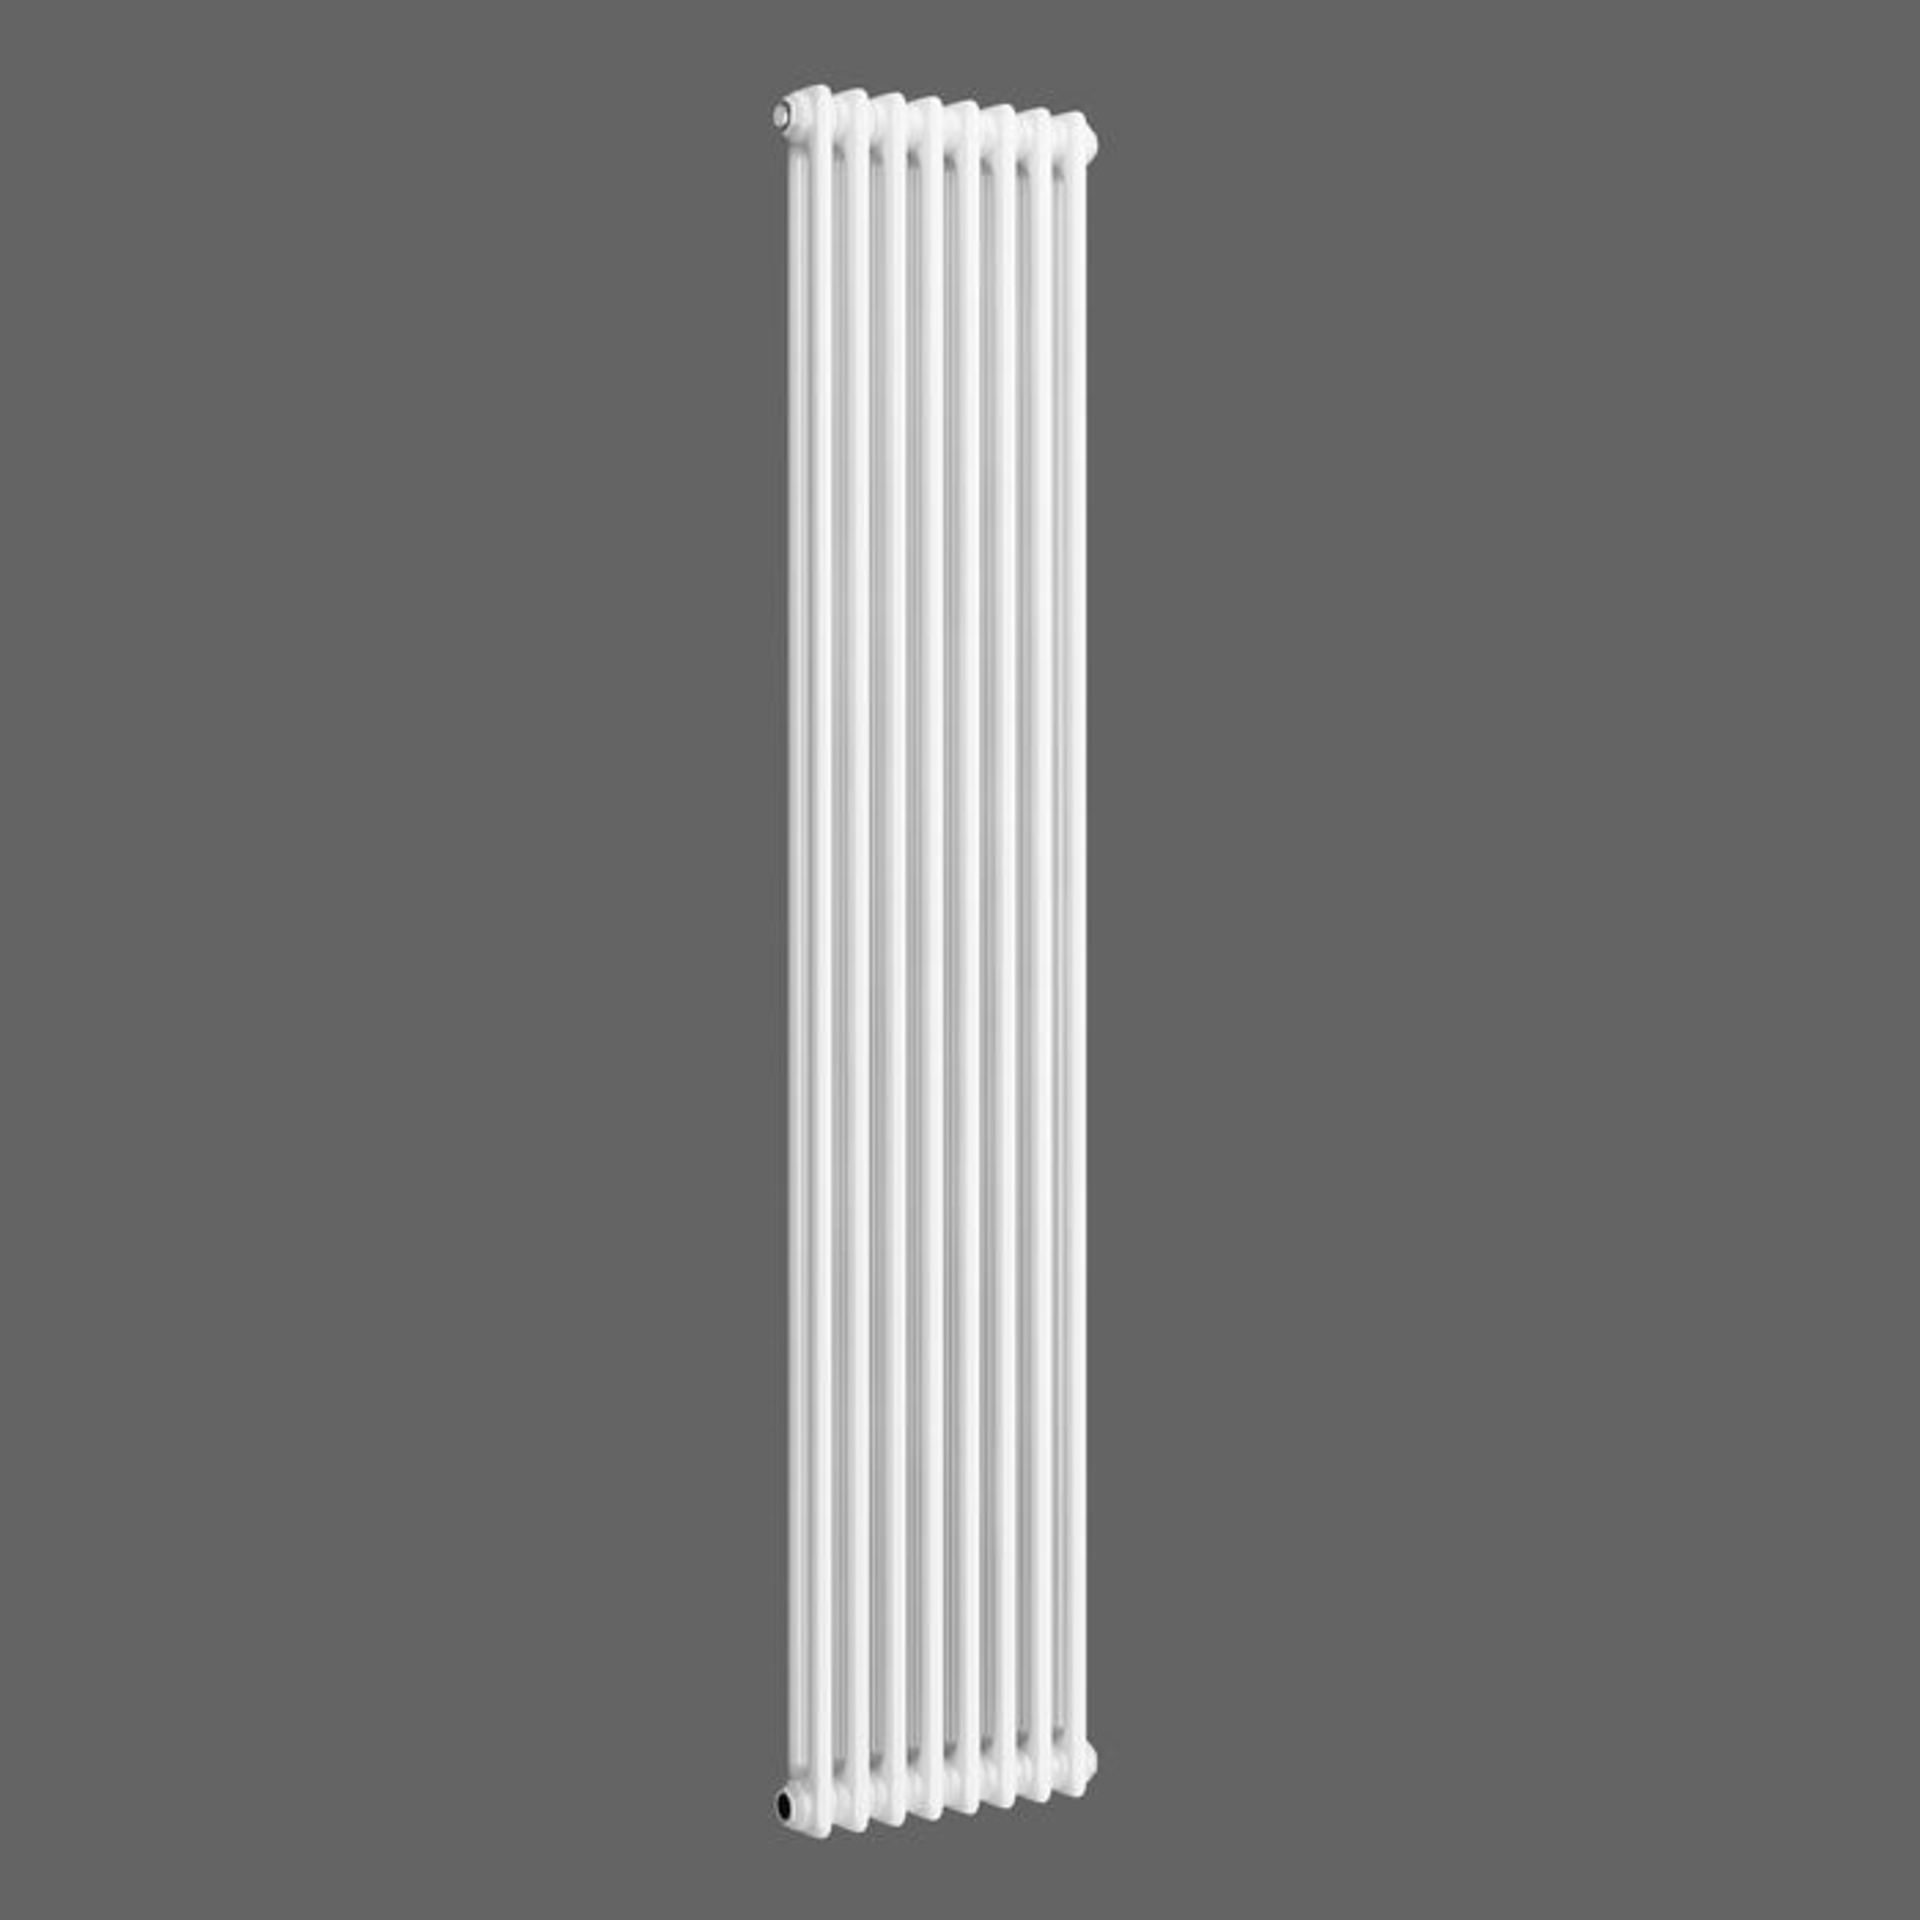 (RK113) 2000x398mm White Double Panel Vertical Colosseum Traditional Radiator. RRP £429.99. F...( - Image 4 of 4